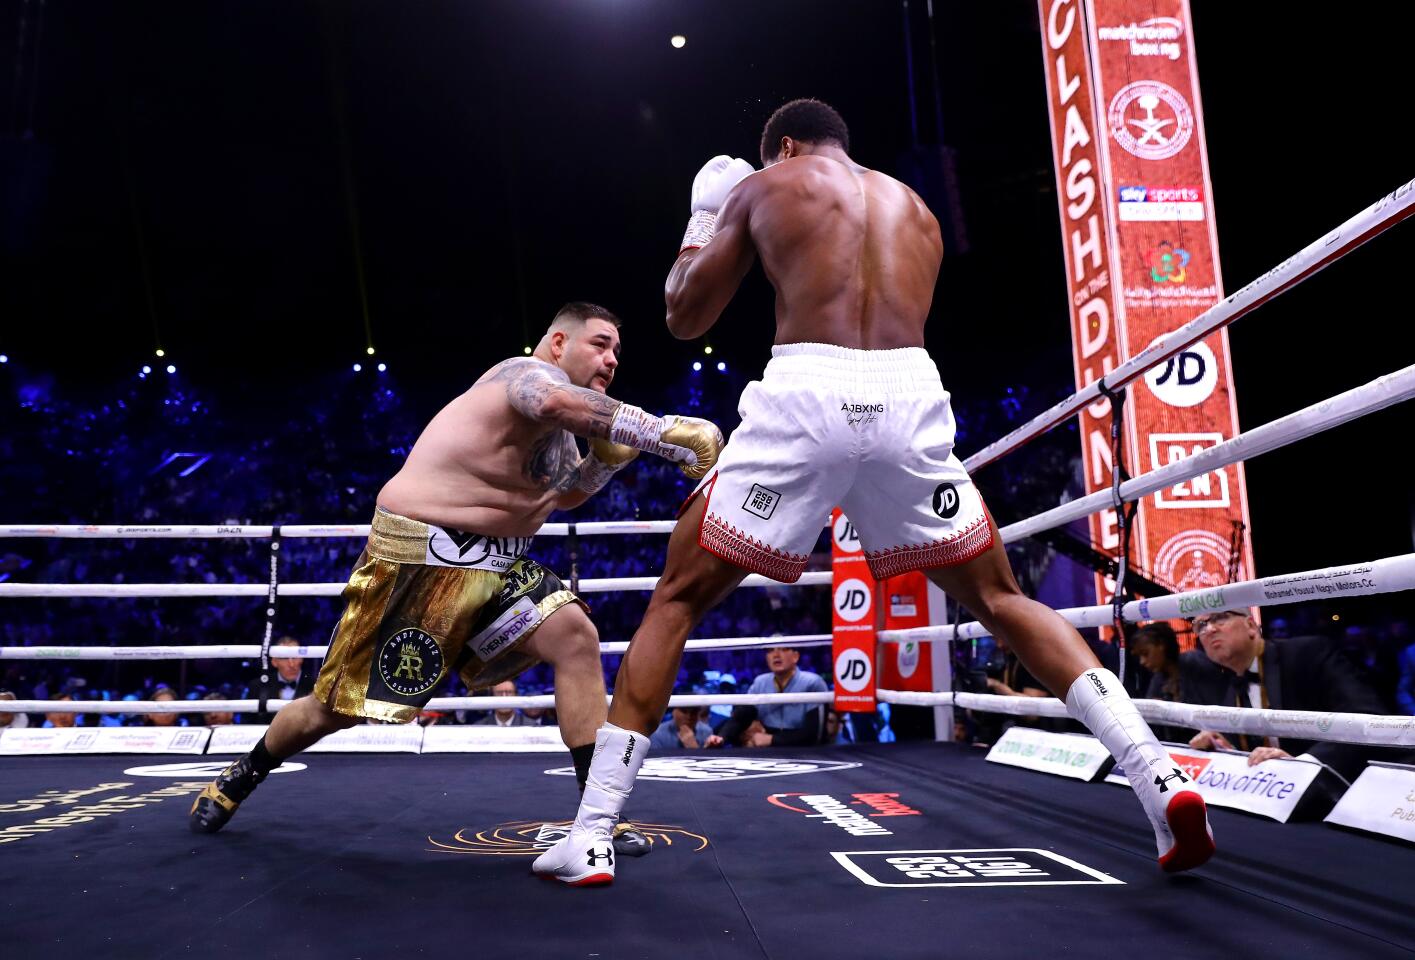 Anthony Joshua dodges a punch from Andy Ruiz Jr. during their heavyweight title fight on Dec. 7 in Diriyah, Saudi Arabia.